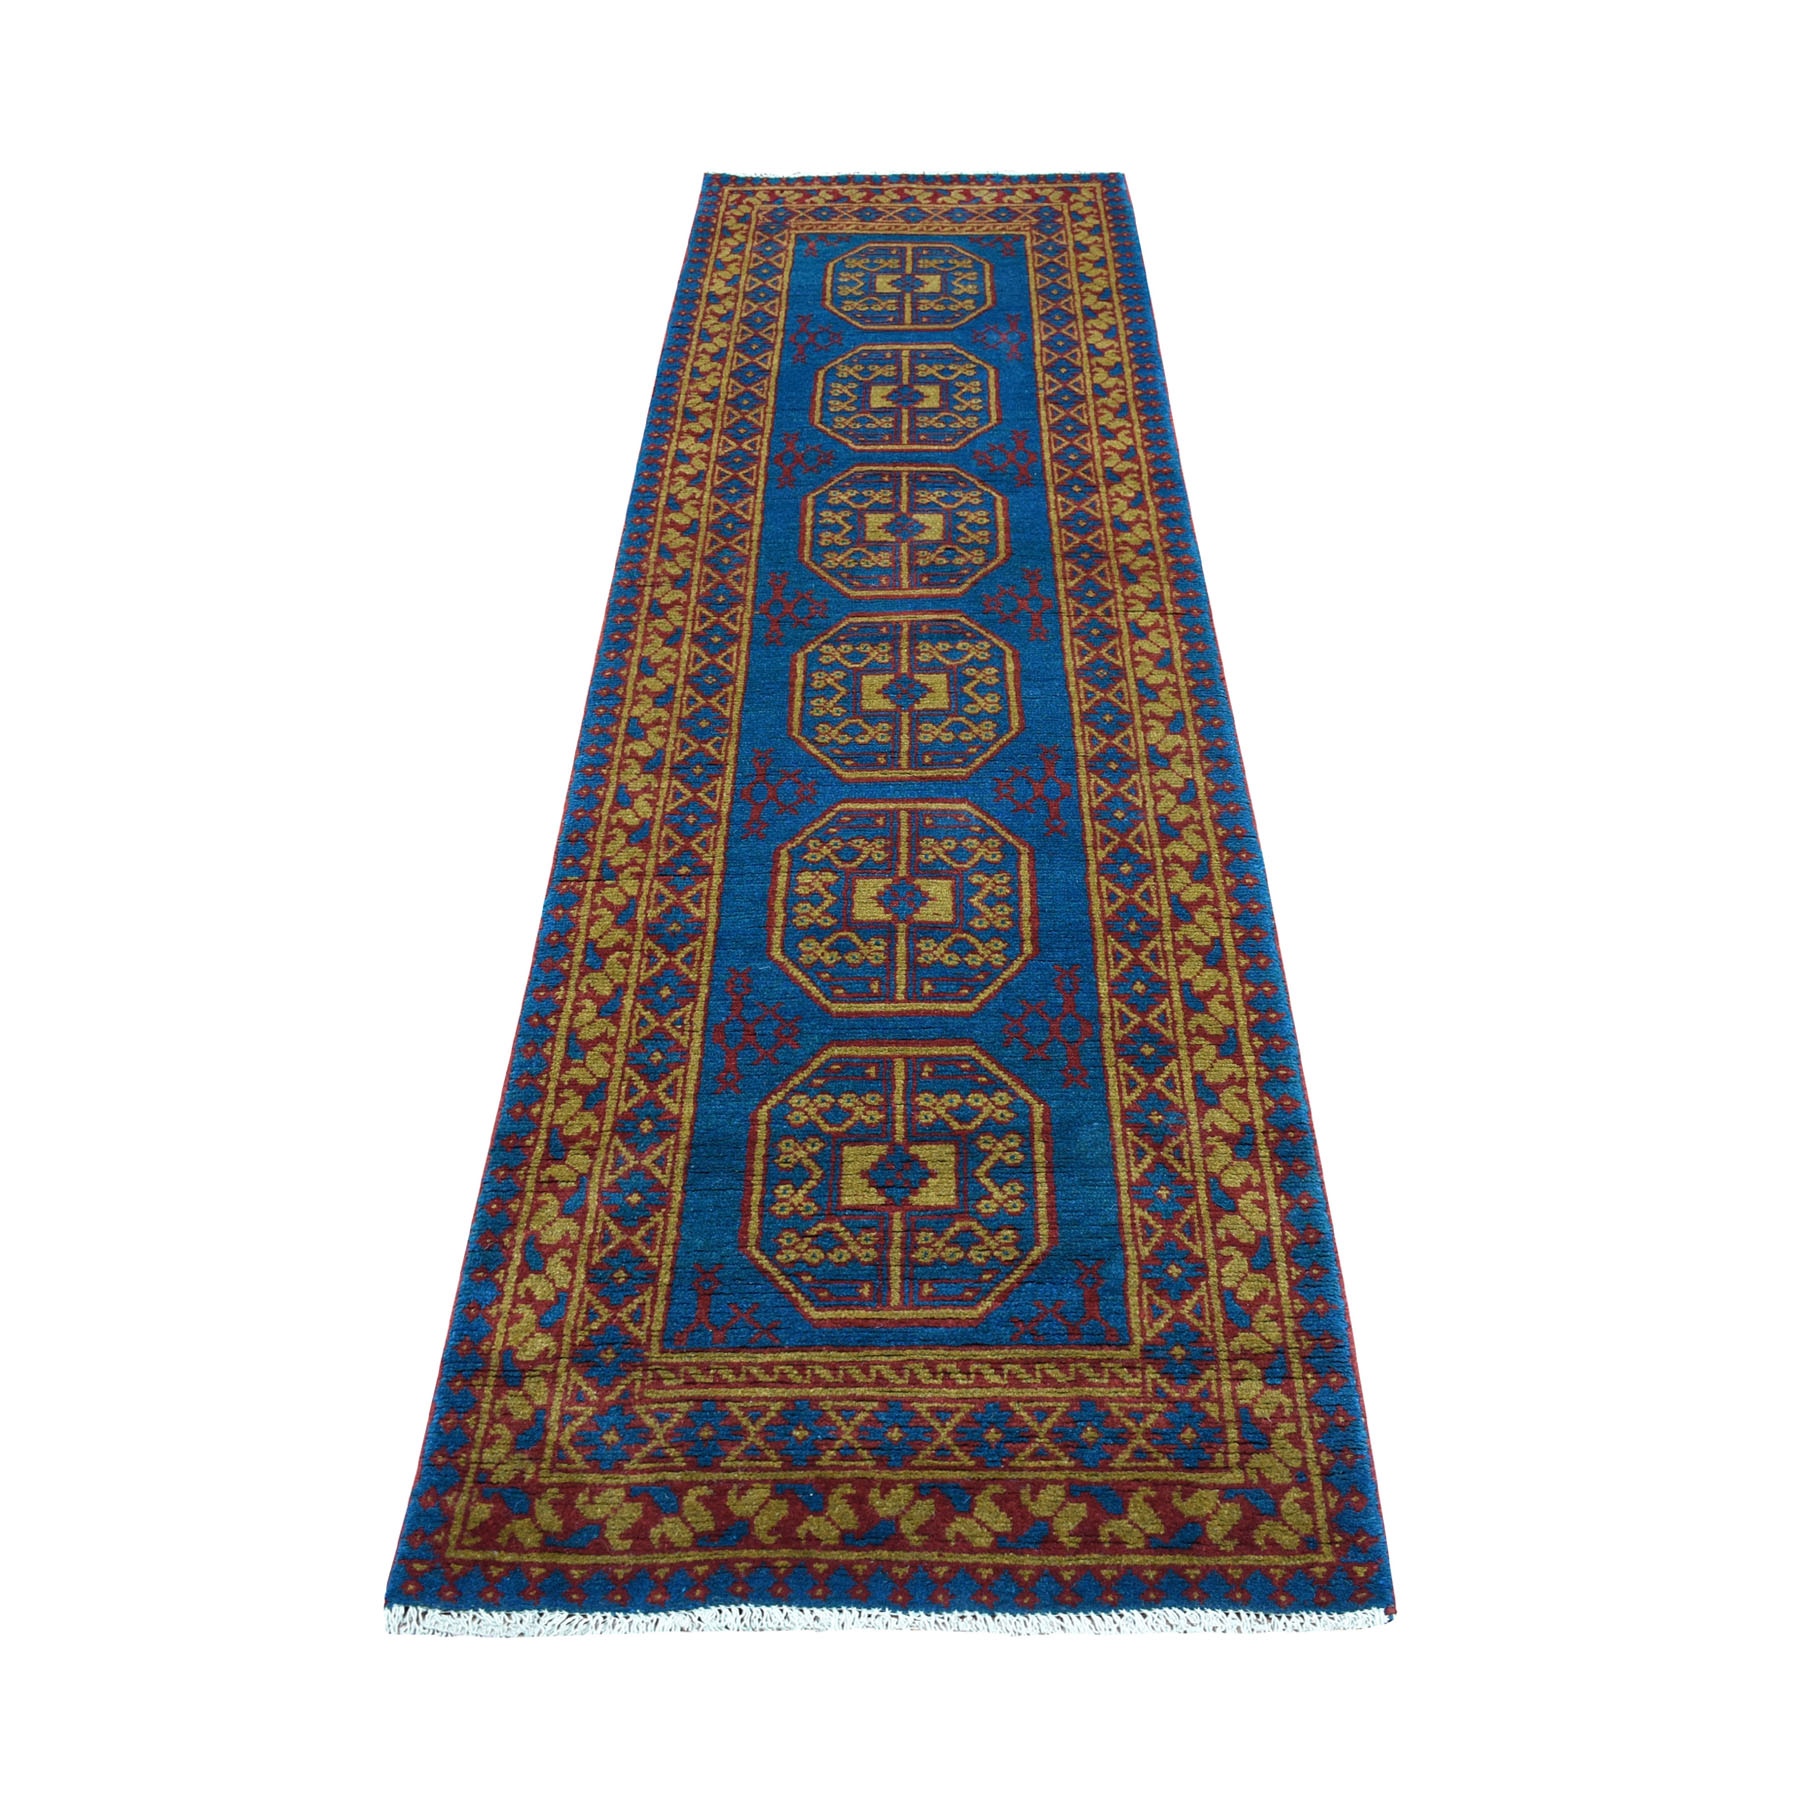 2'7"X9'4" Blue Elephant Feet Design Colorful Afghan Baluch Hand Knotted Pure Wool Runner Oriental Rug moaeccbc